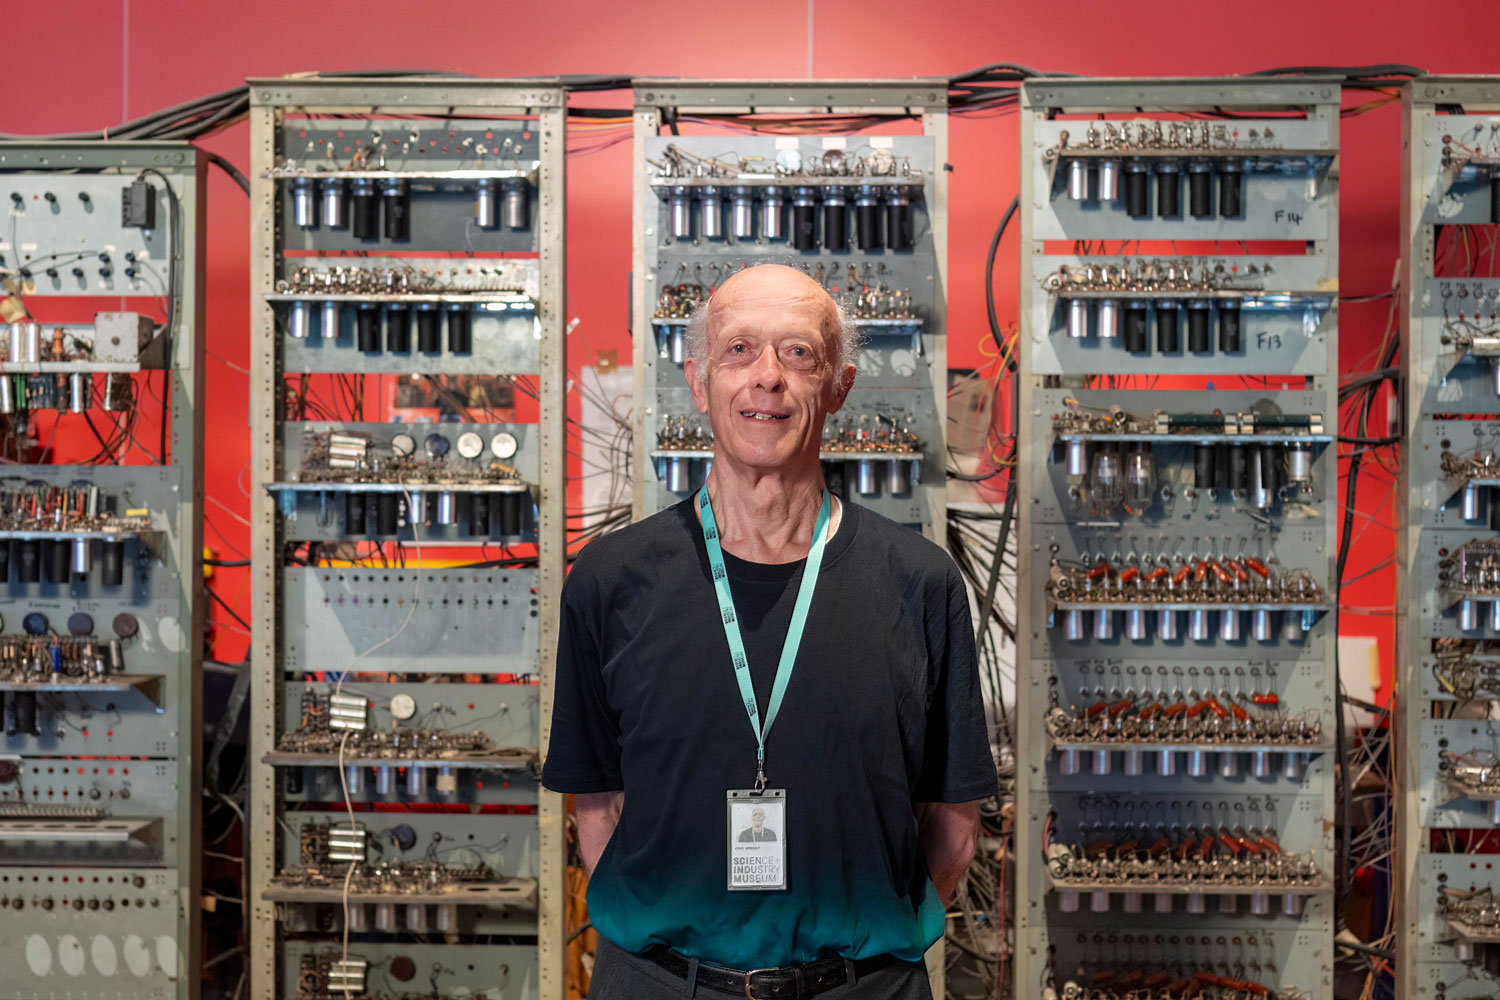 An older man in a museum uniform stood in front of an early computer.